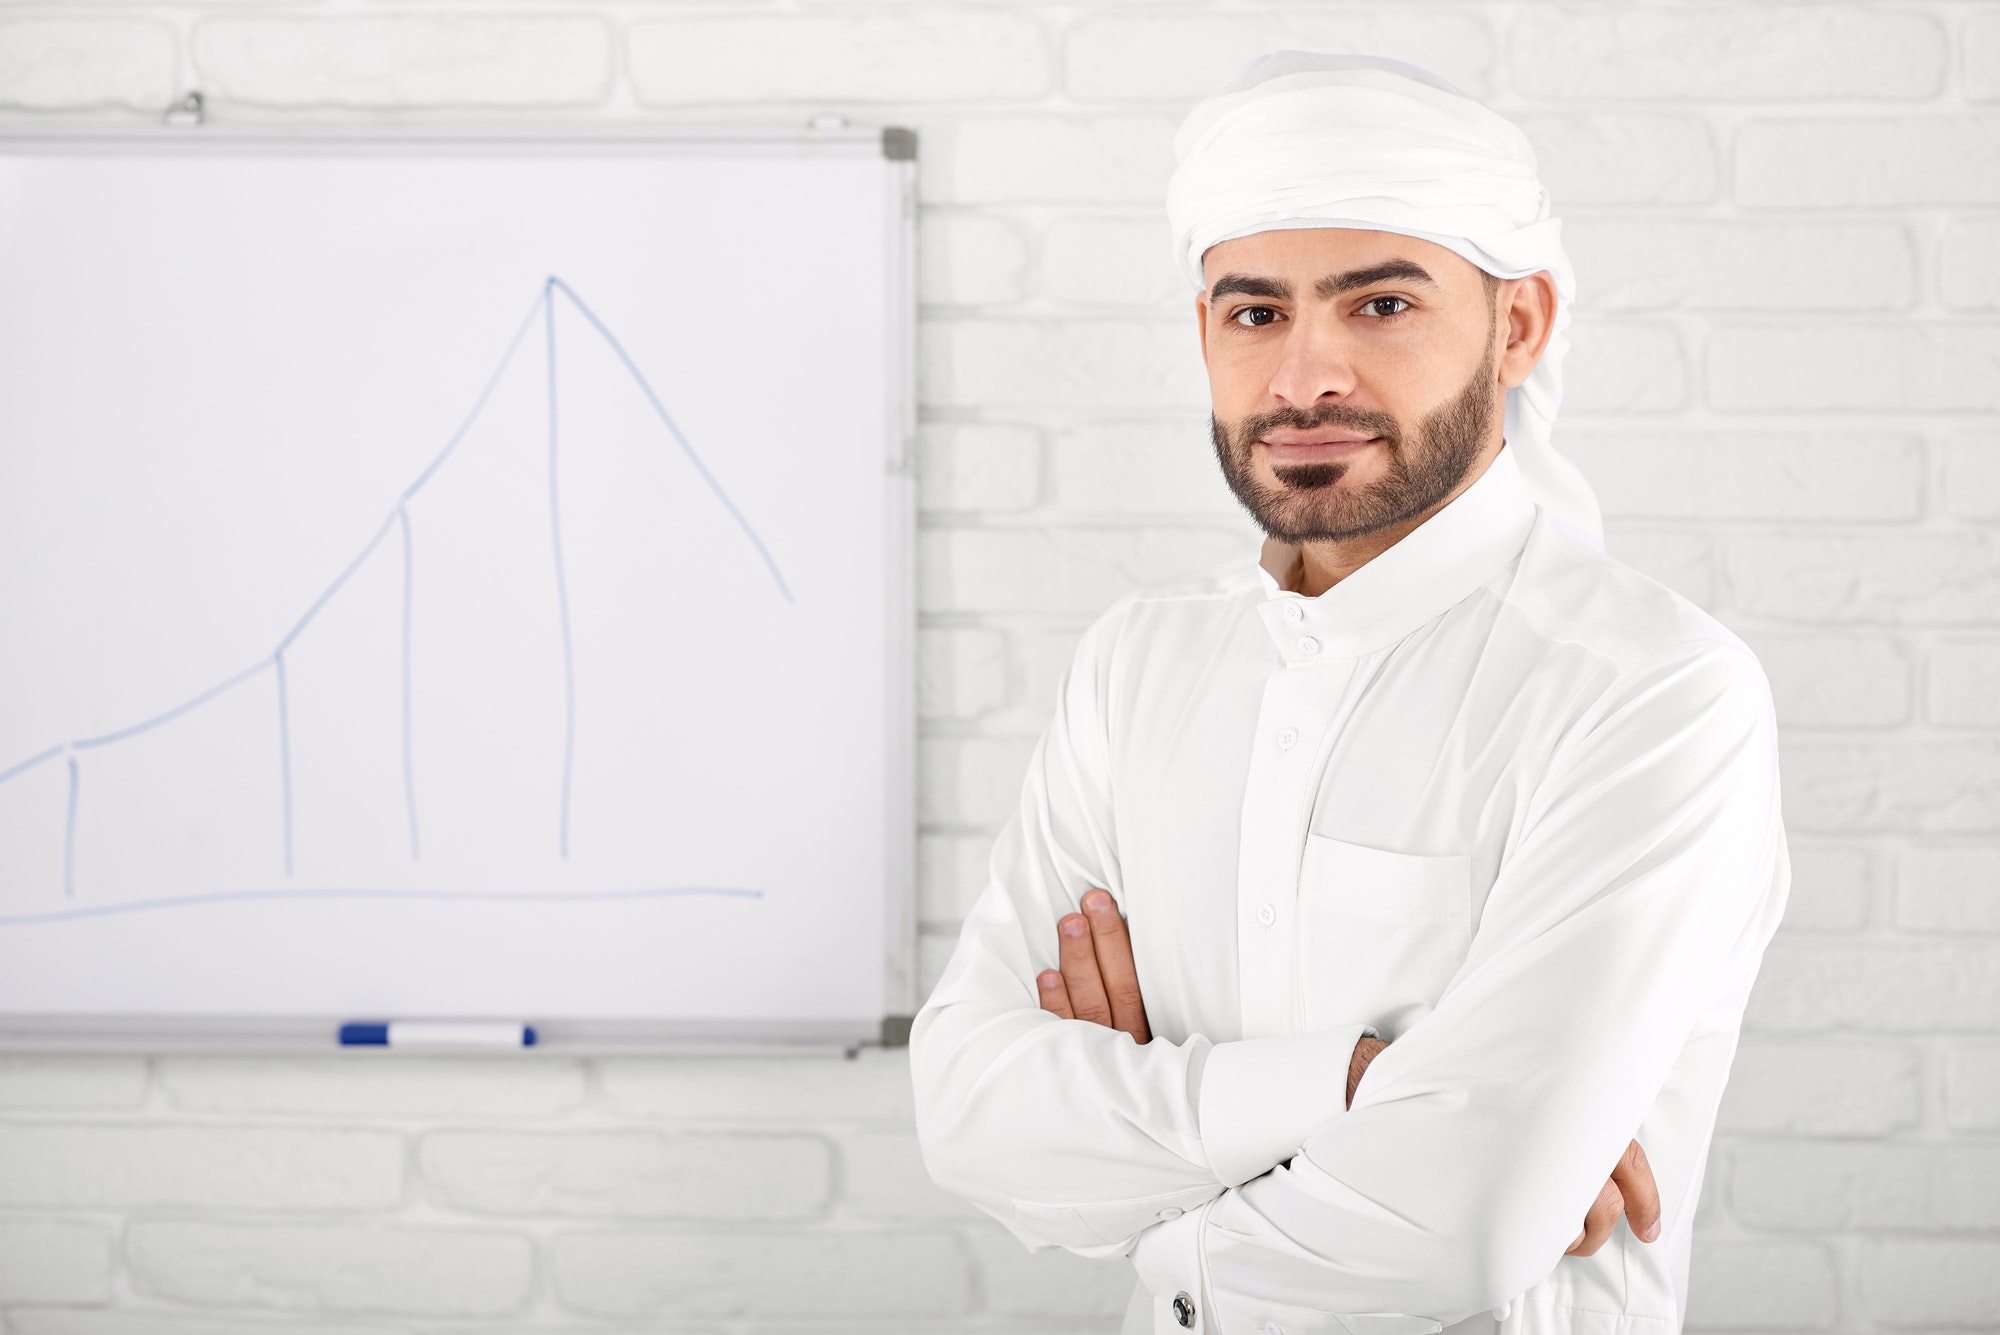 Handsome young muslim male in traditional Islamic clothing standing in front of financial chart